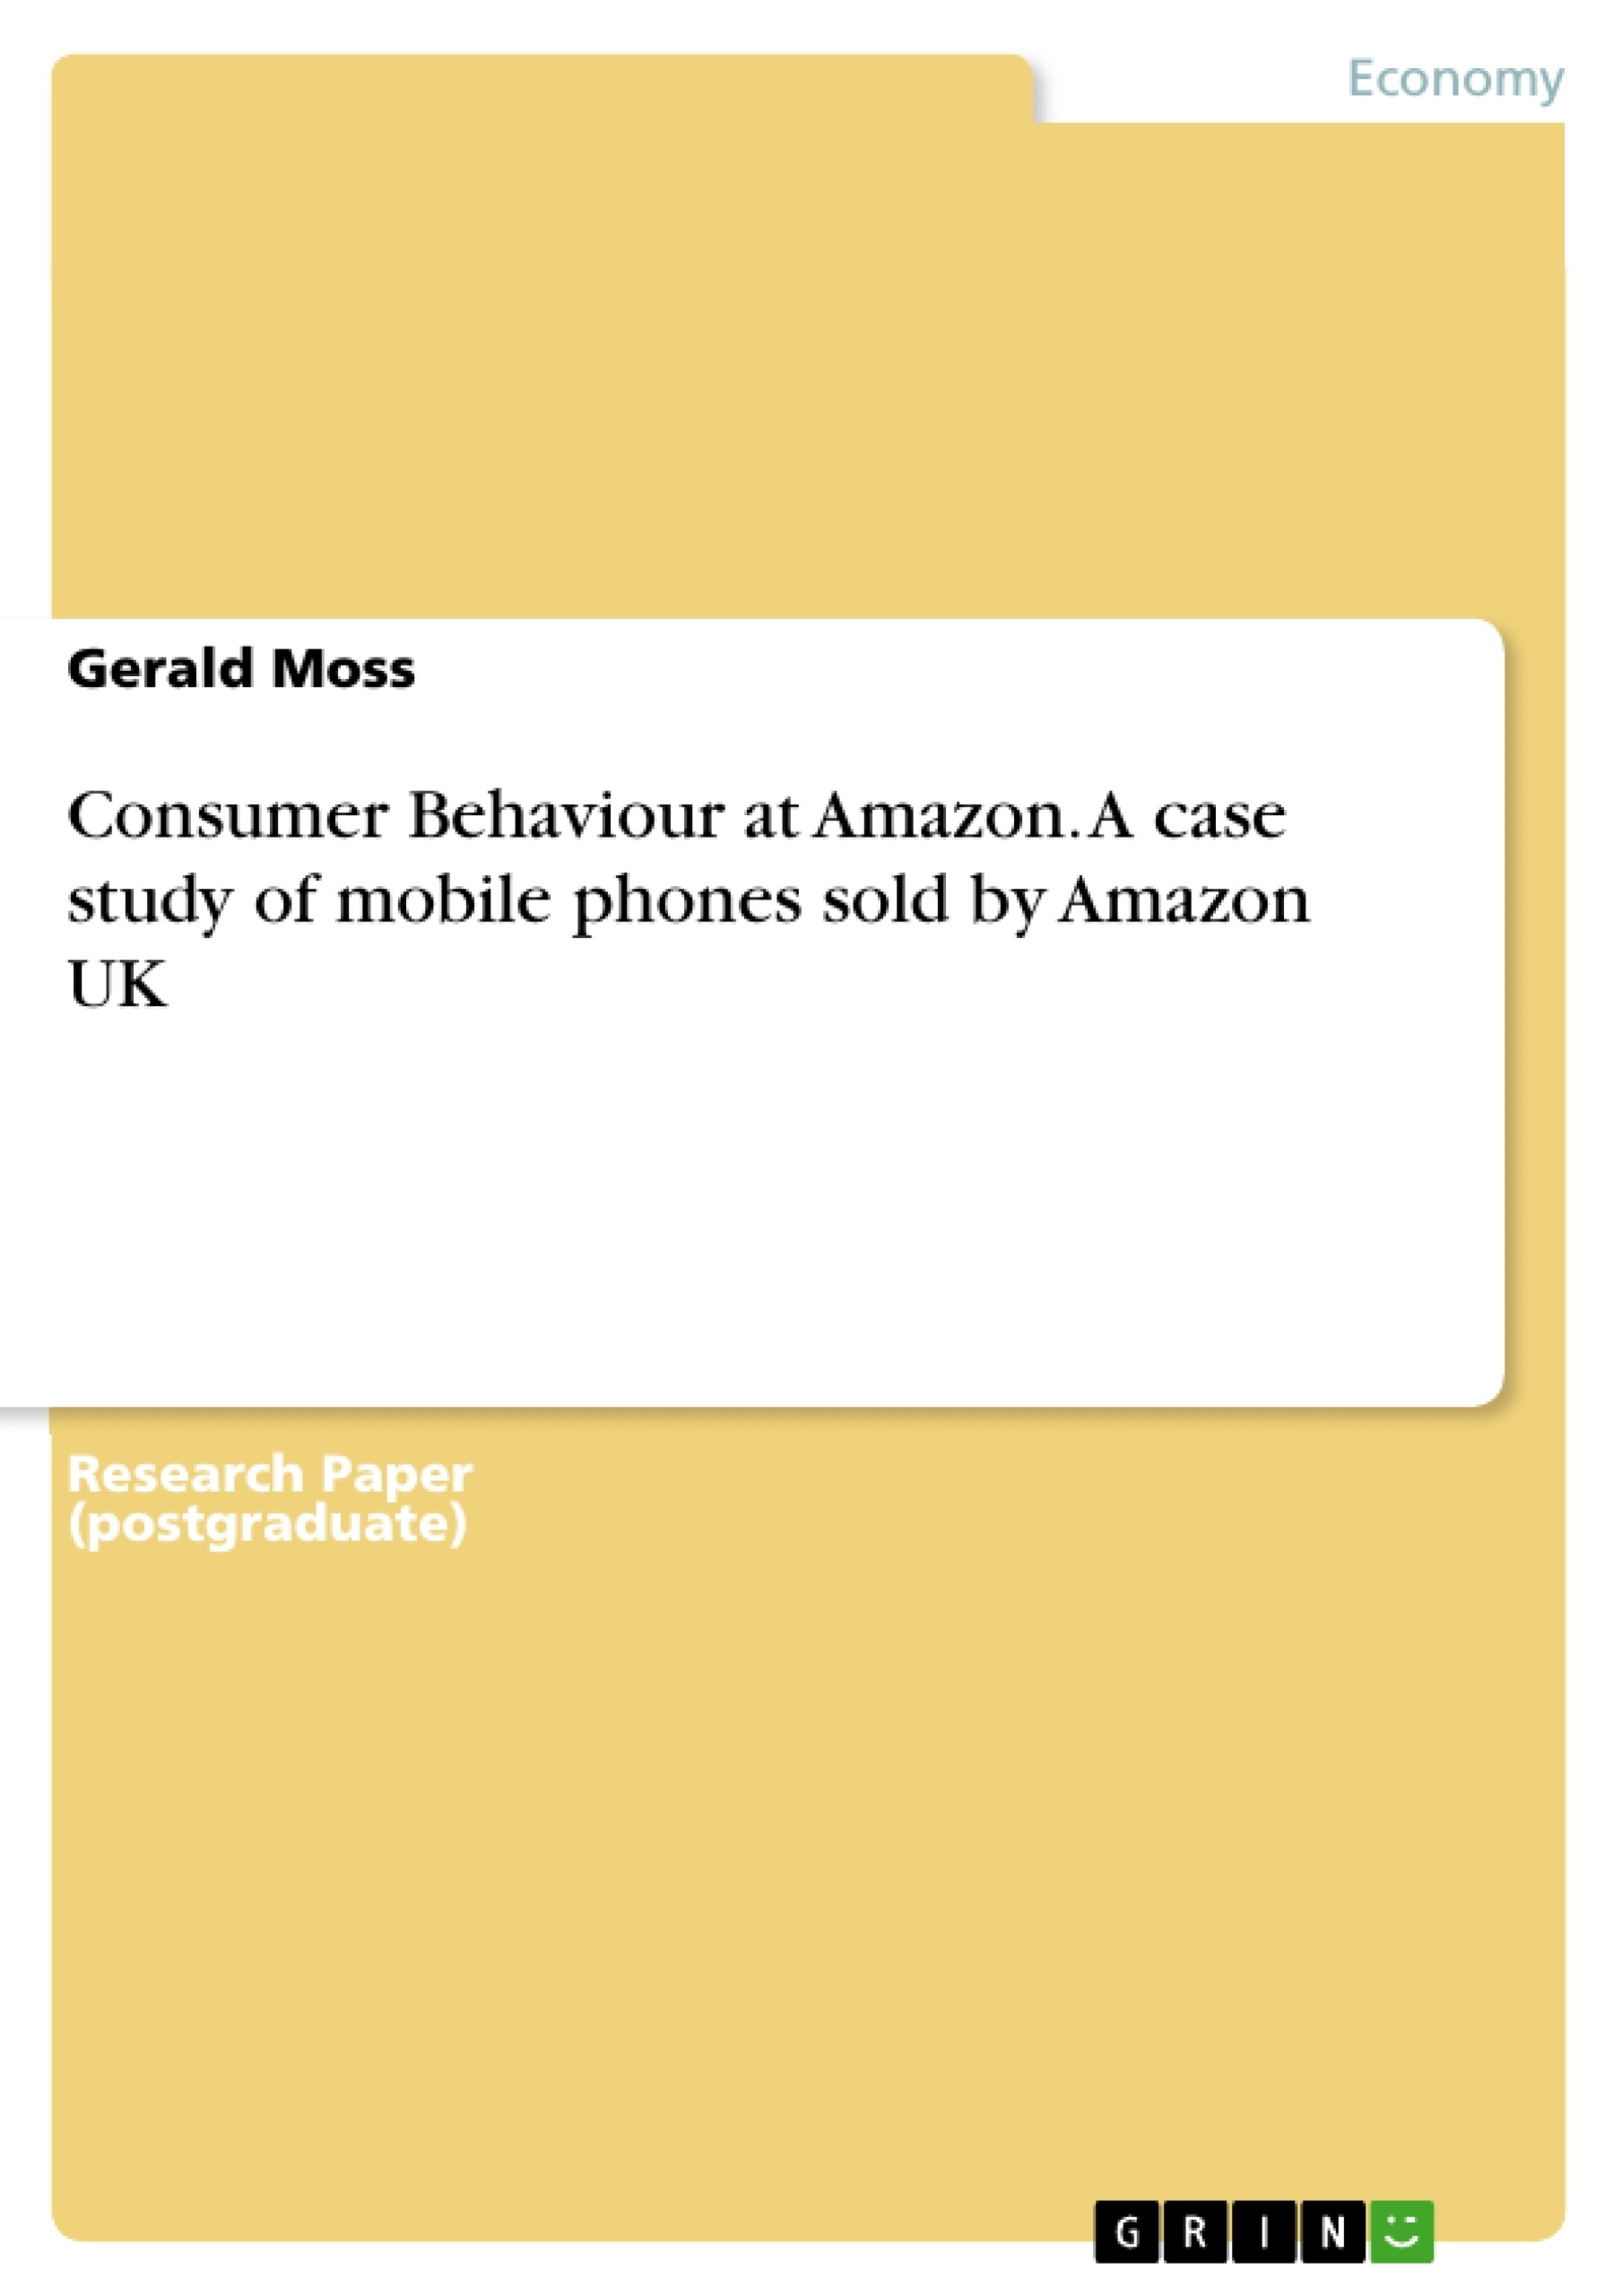 Title: Consumer Behaviour at Amazon. A case study of mobile phones sold by Amazon UK